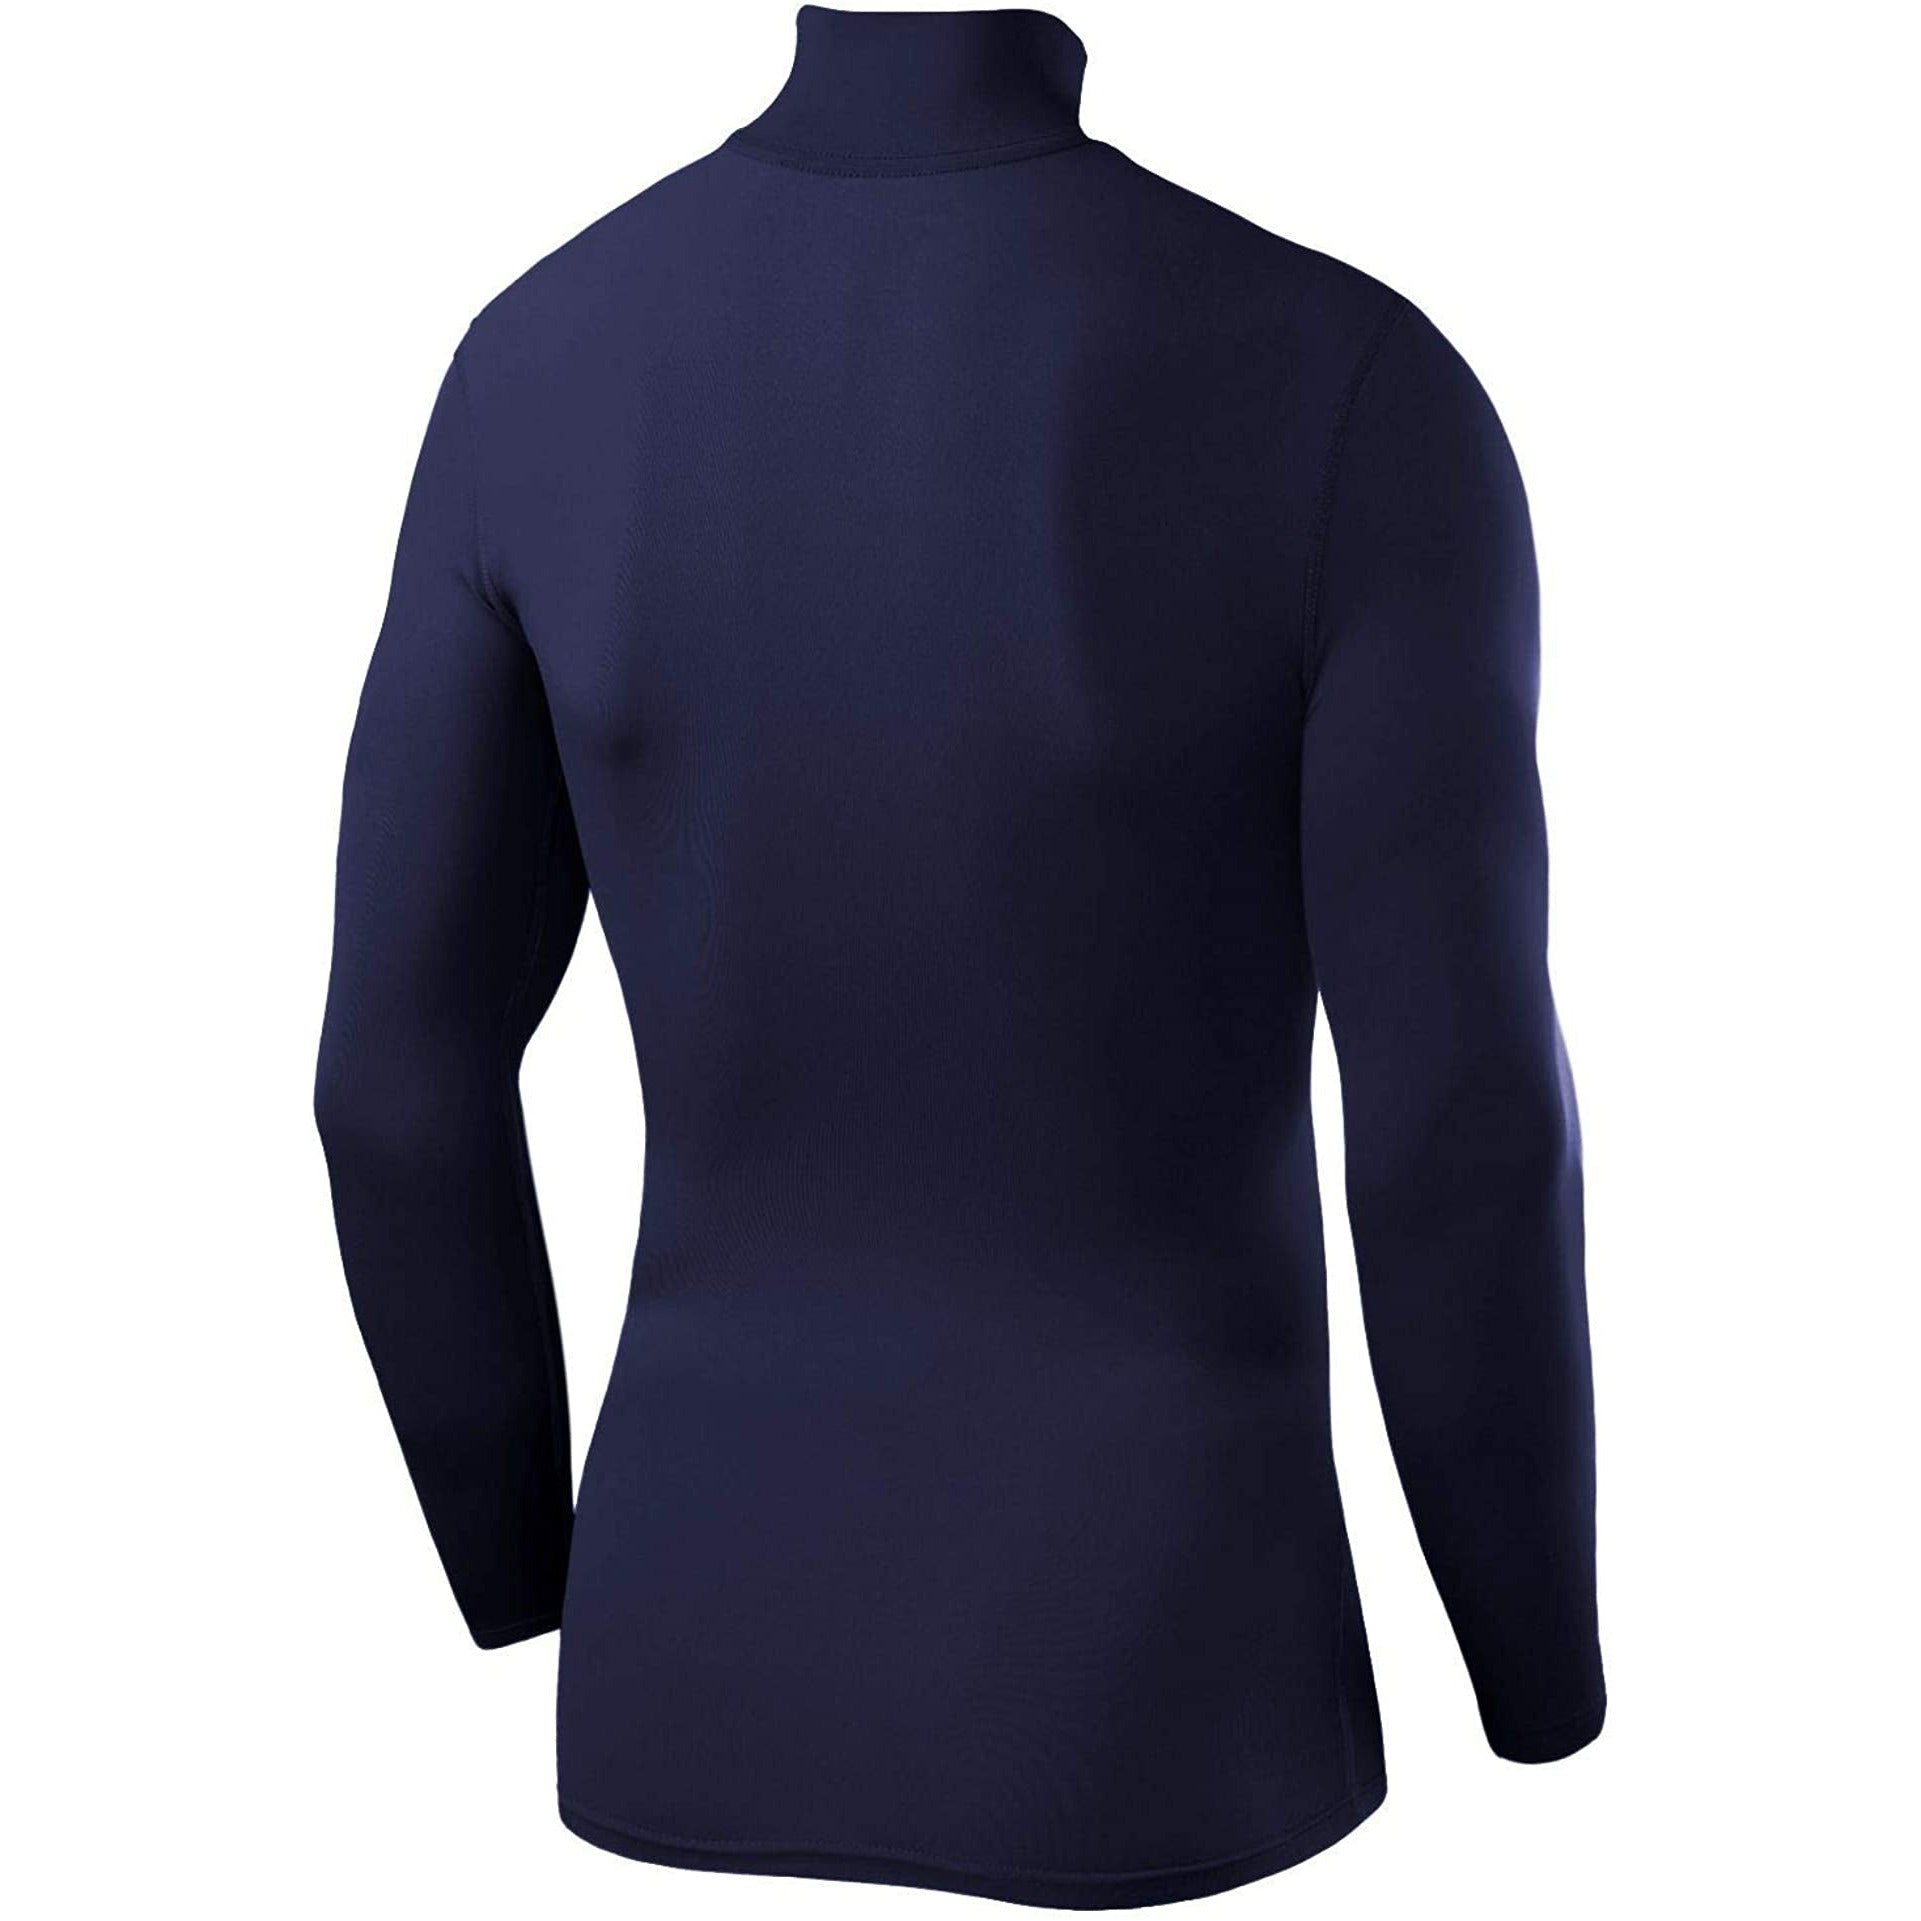 Tca Powerlayer Long Sleeve Mock Compression Top S Plls Navy Mock Back View